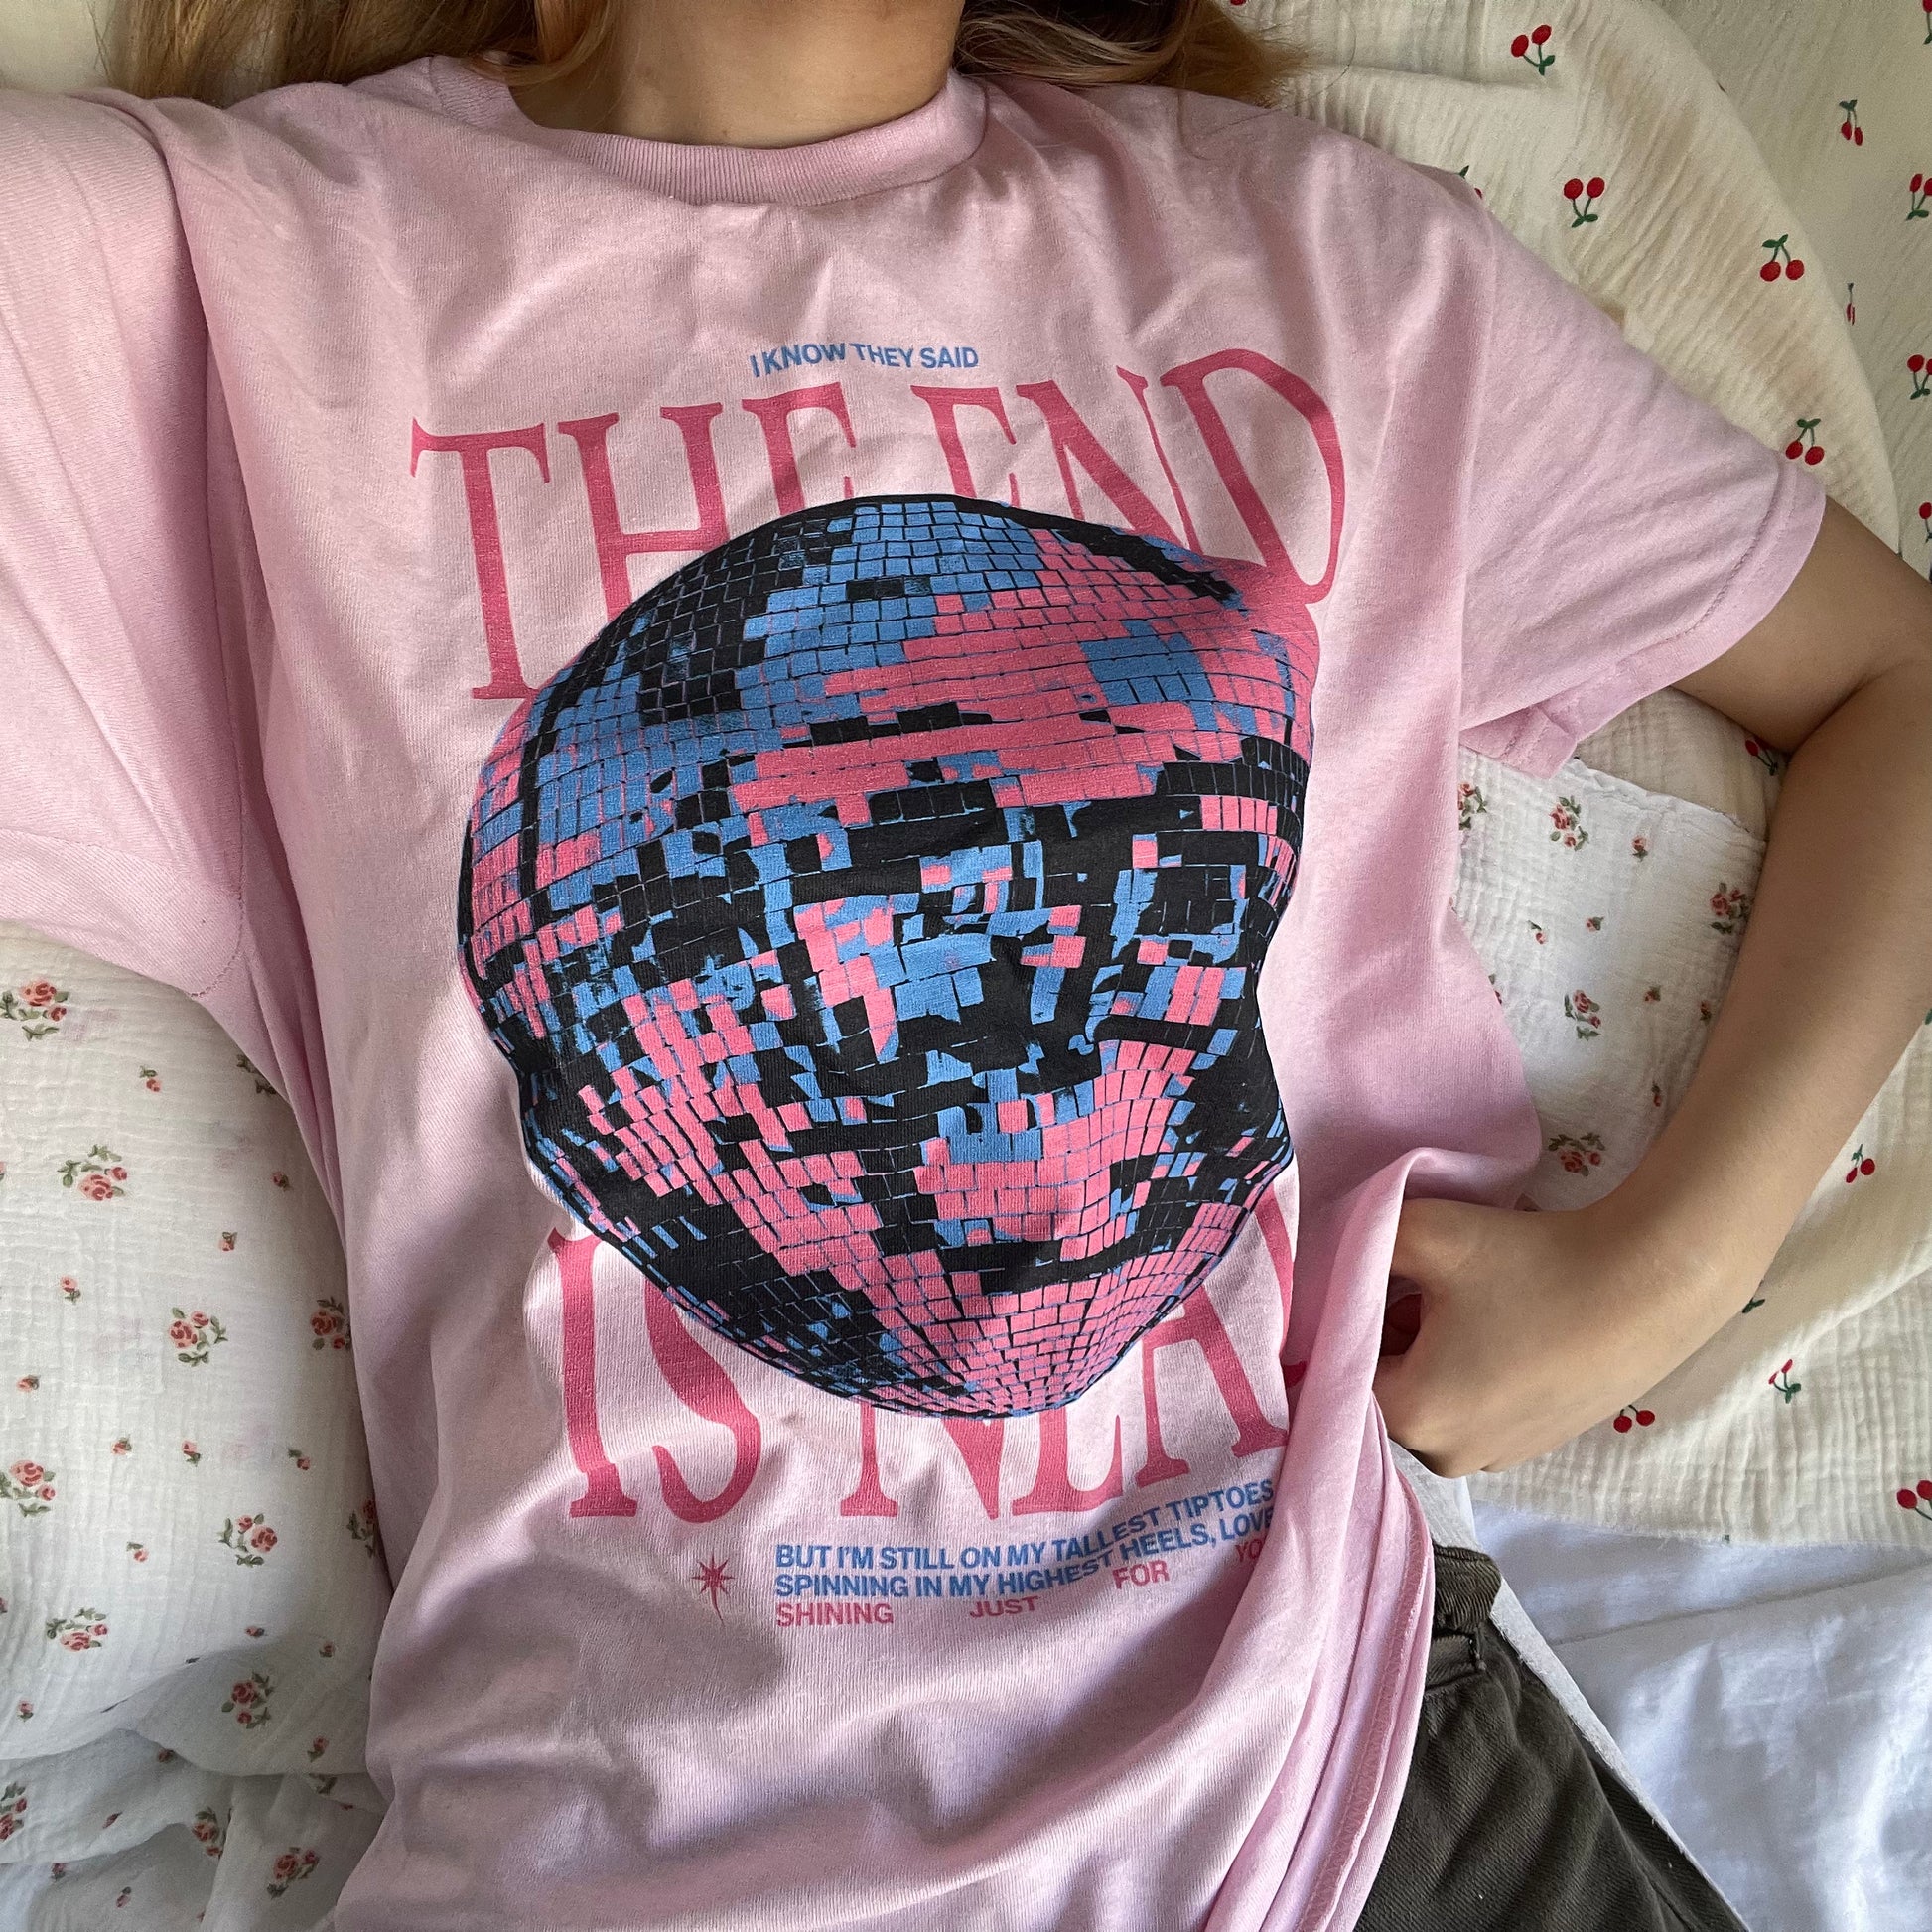 Mirrorball (The End Is Near) tee – at seven studio